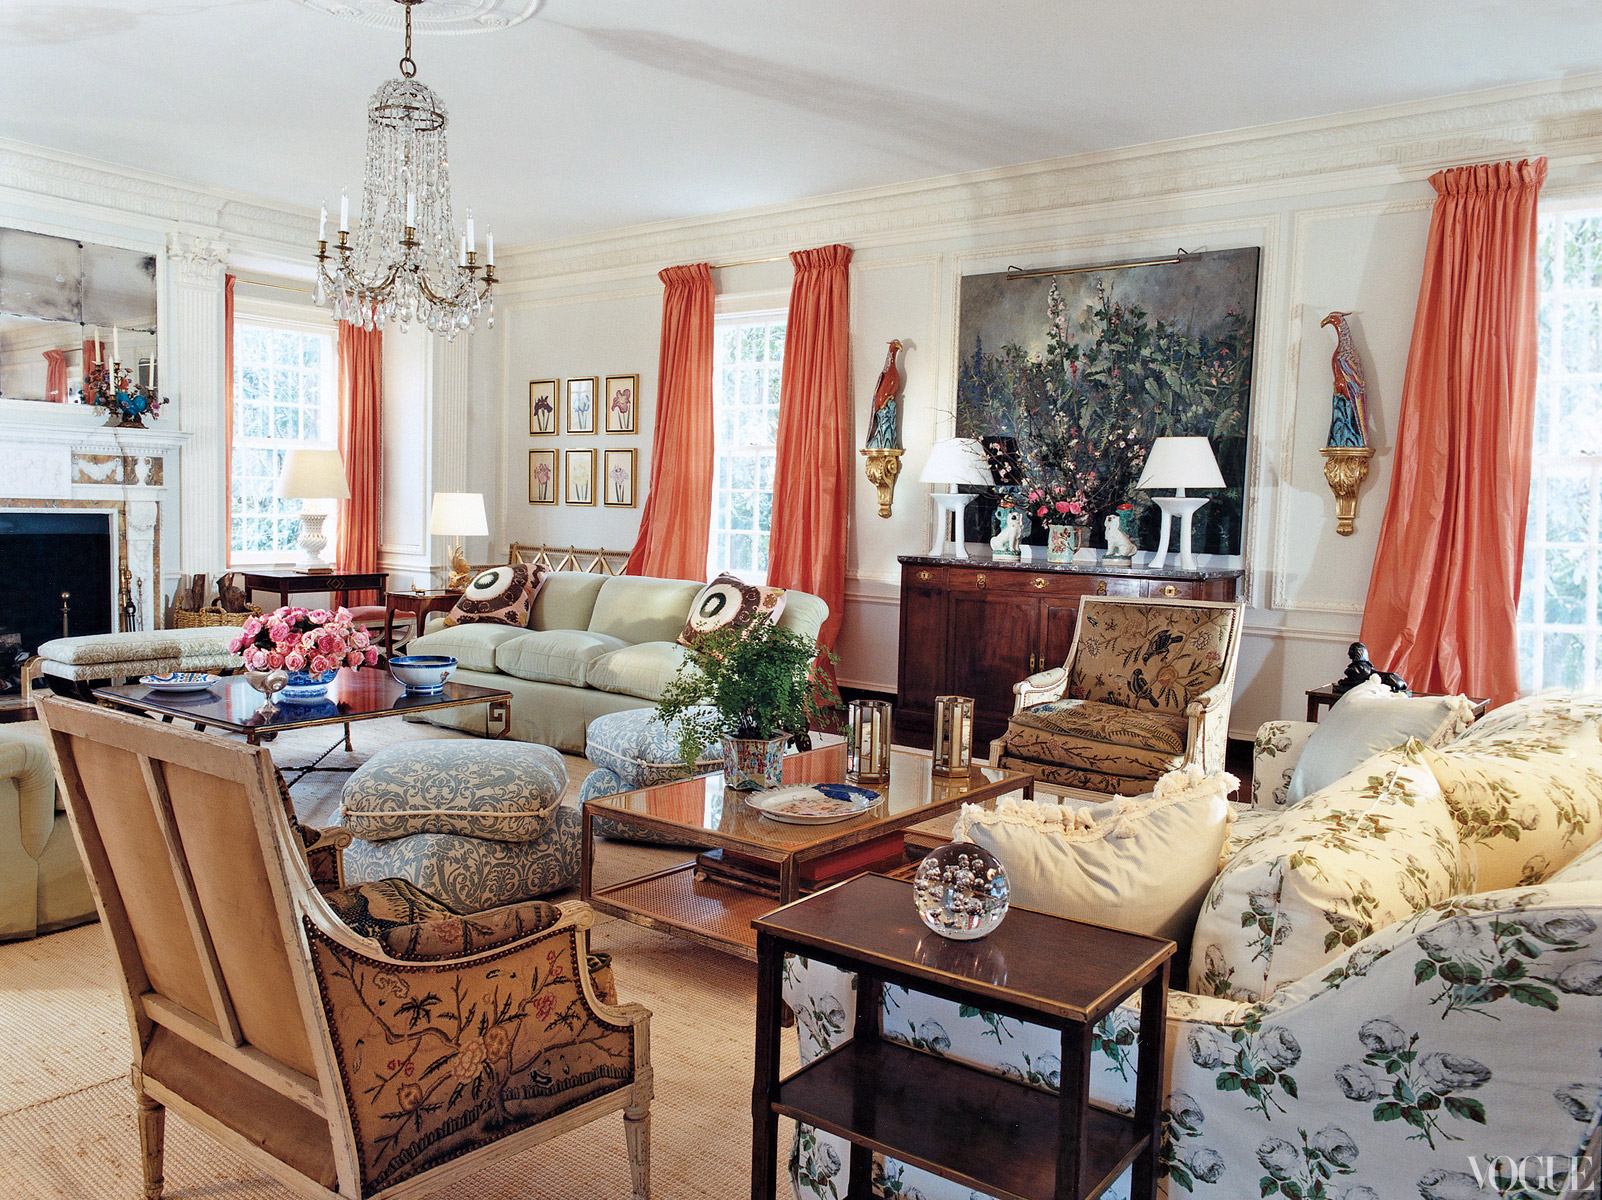 Famous folk at home: Tory Burch's home in Southampton